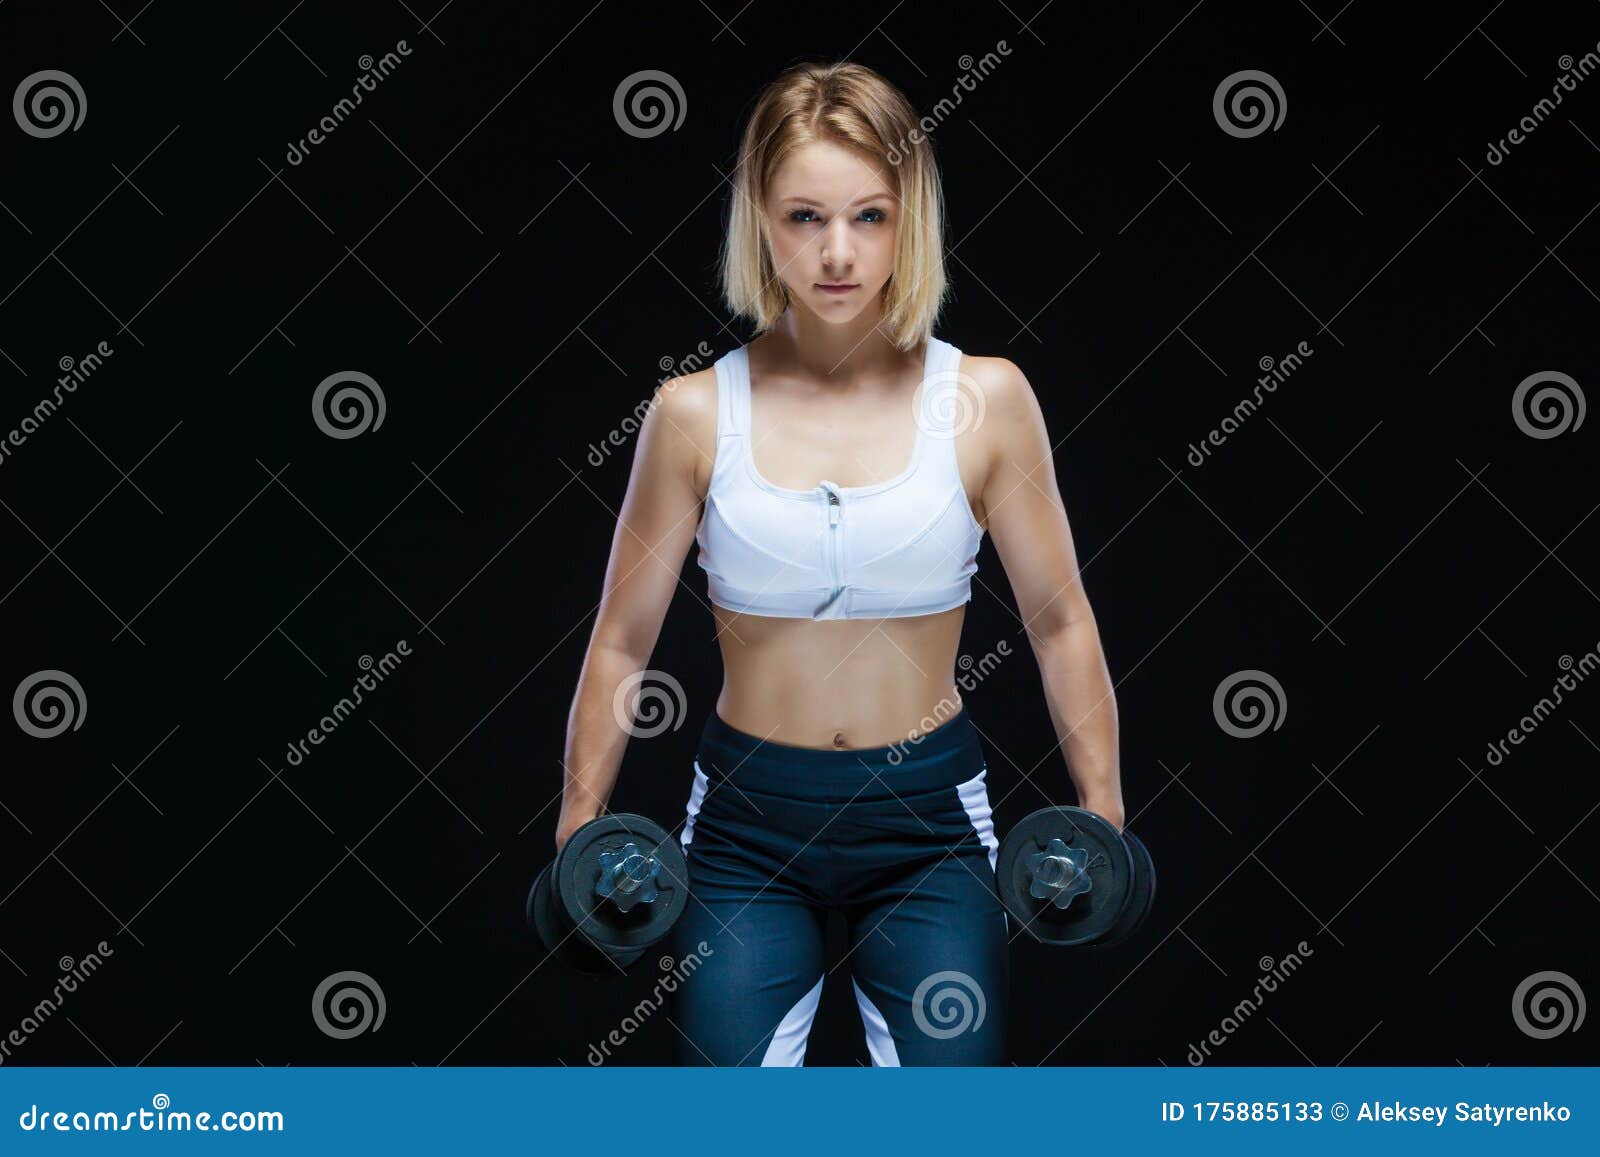 Closeup Portrait Of A Fitness Muscular Young Girl Posing With